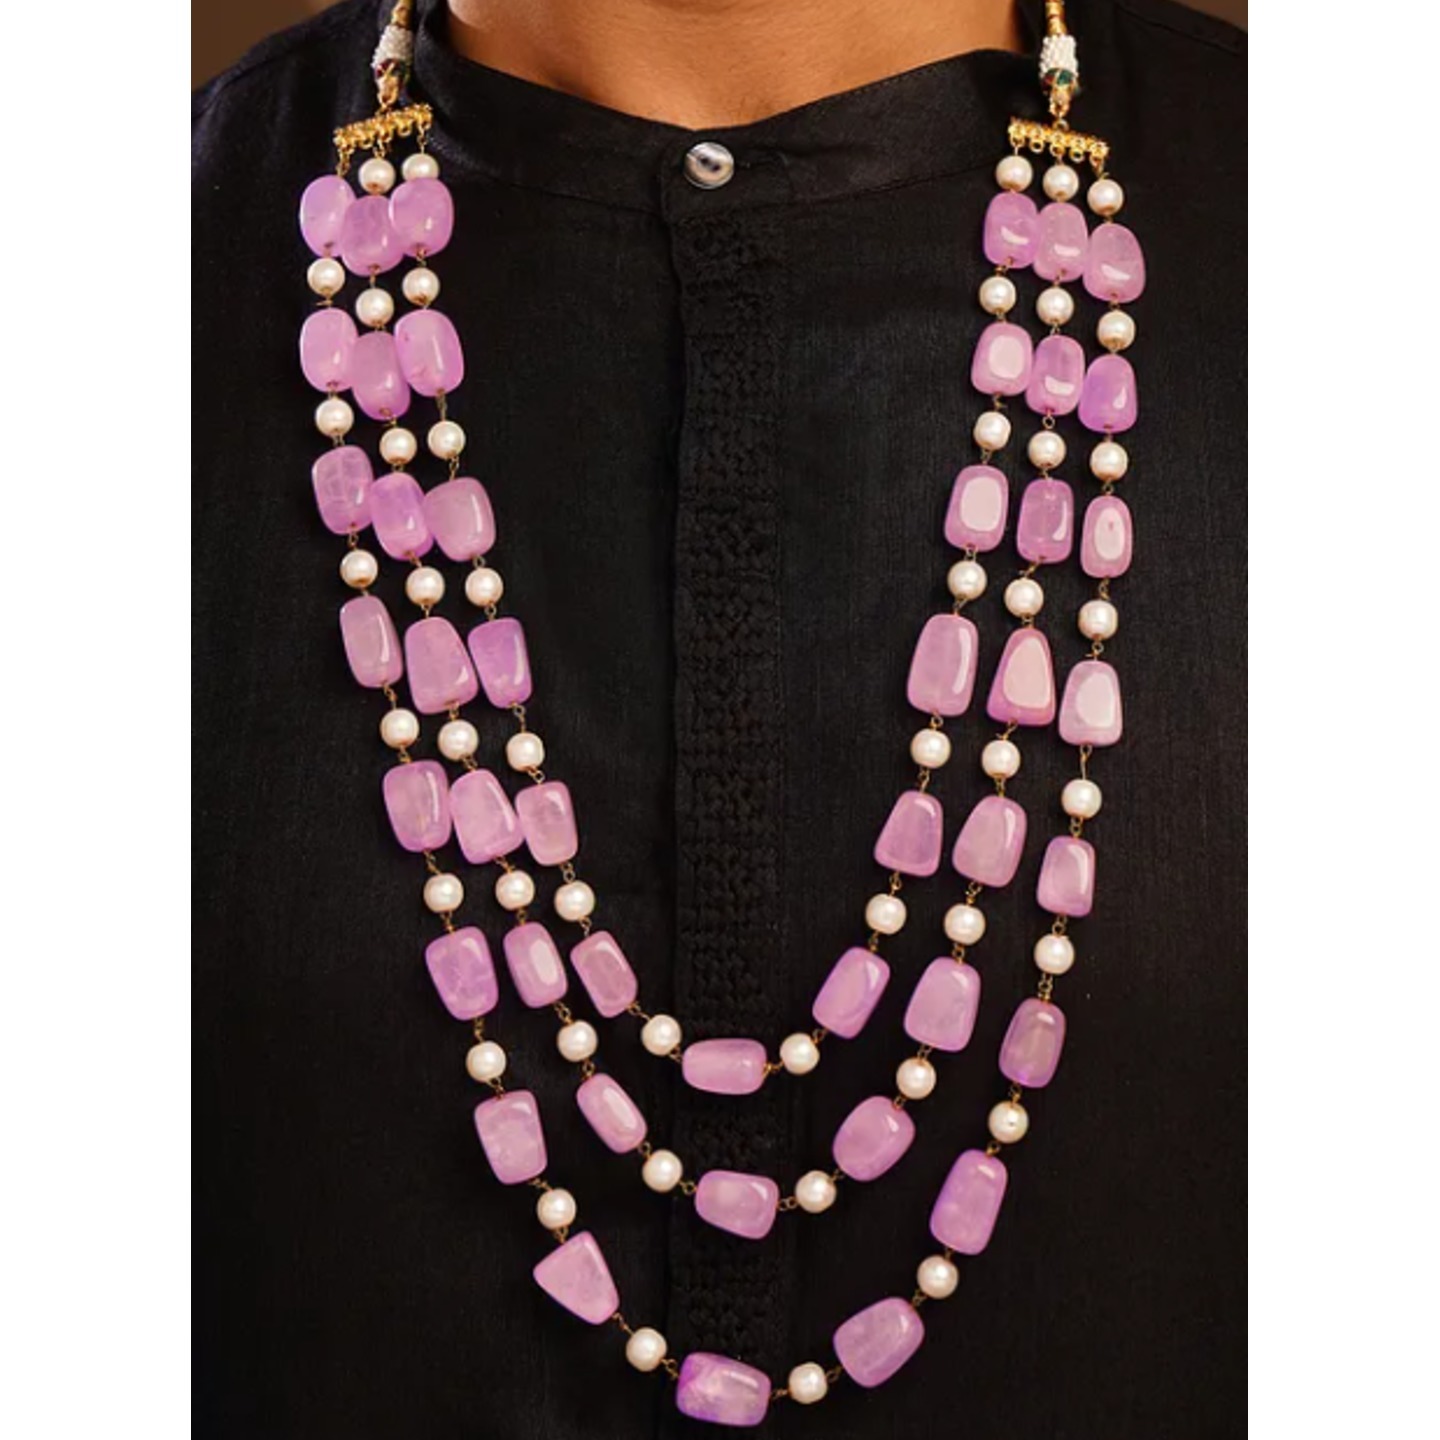 Pink White Beaded Layered Necklace With Pearls For Men